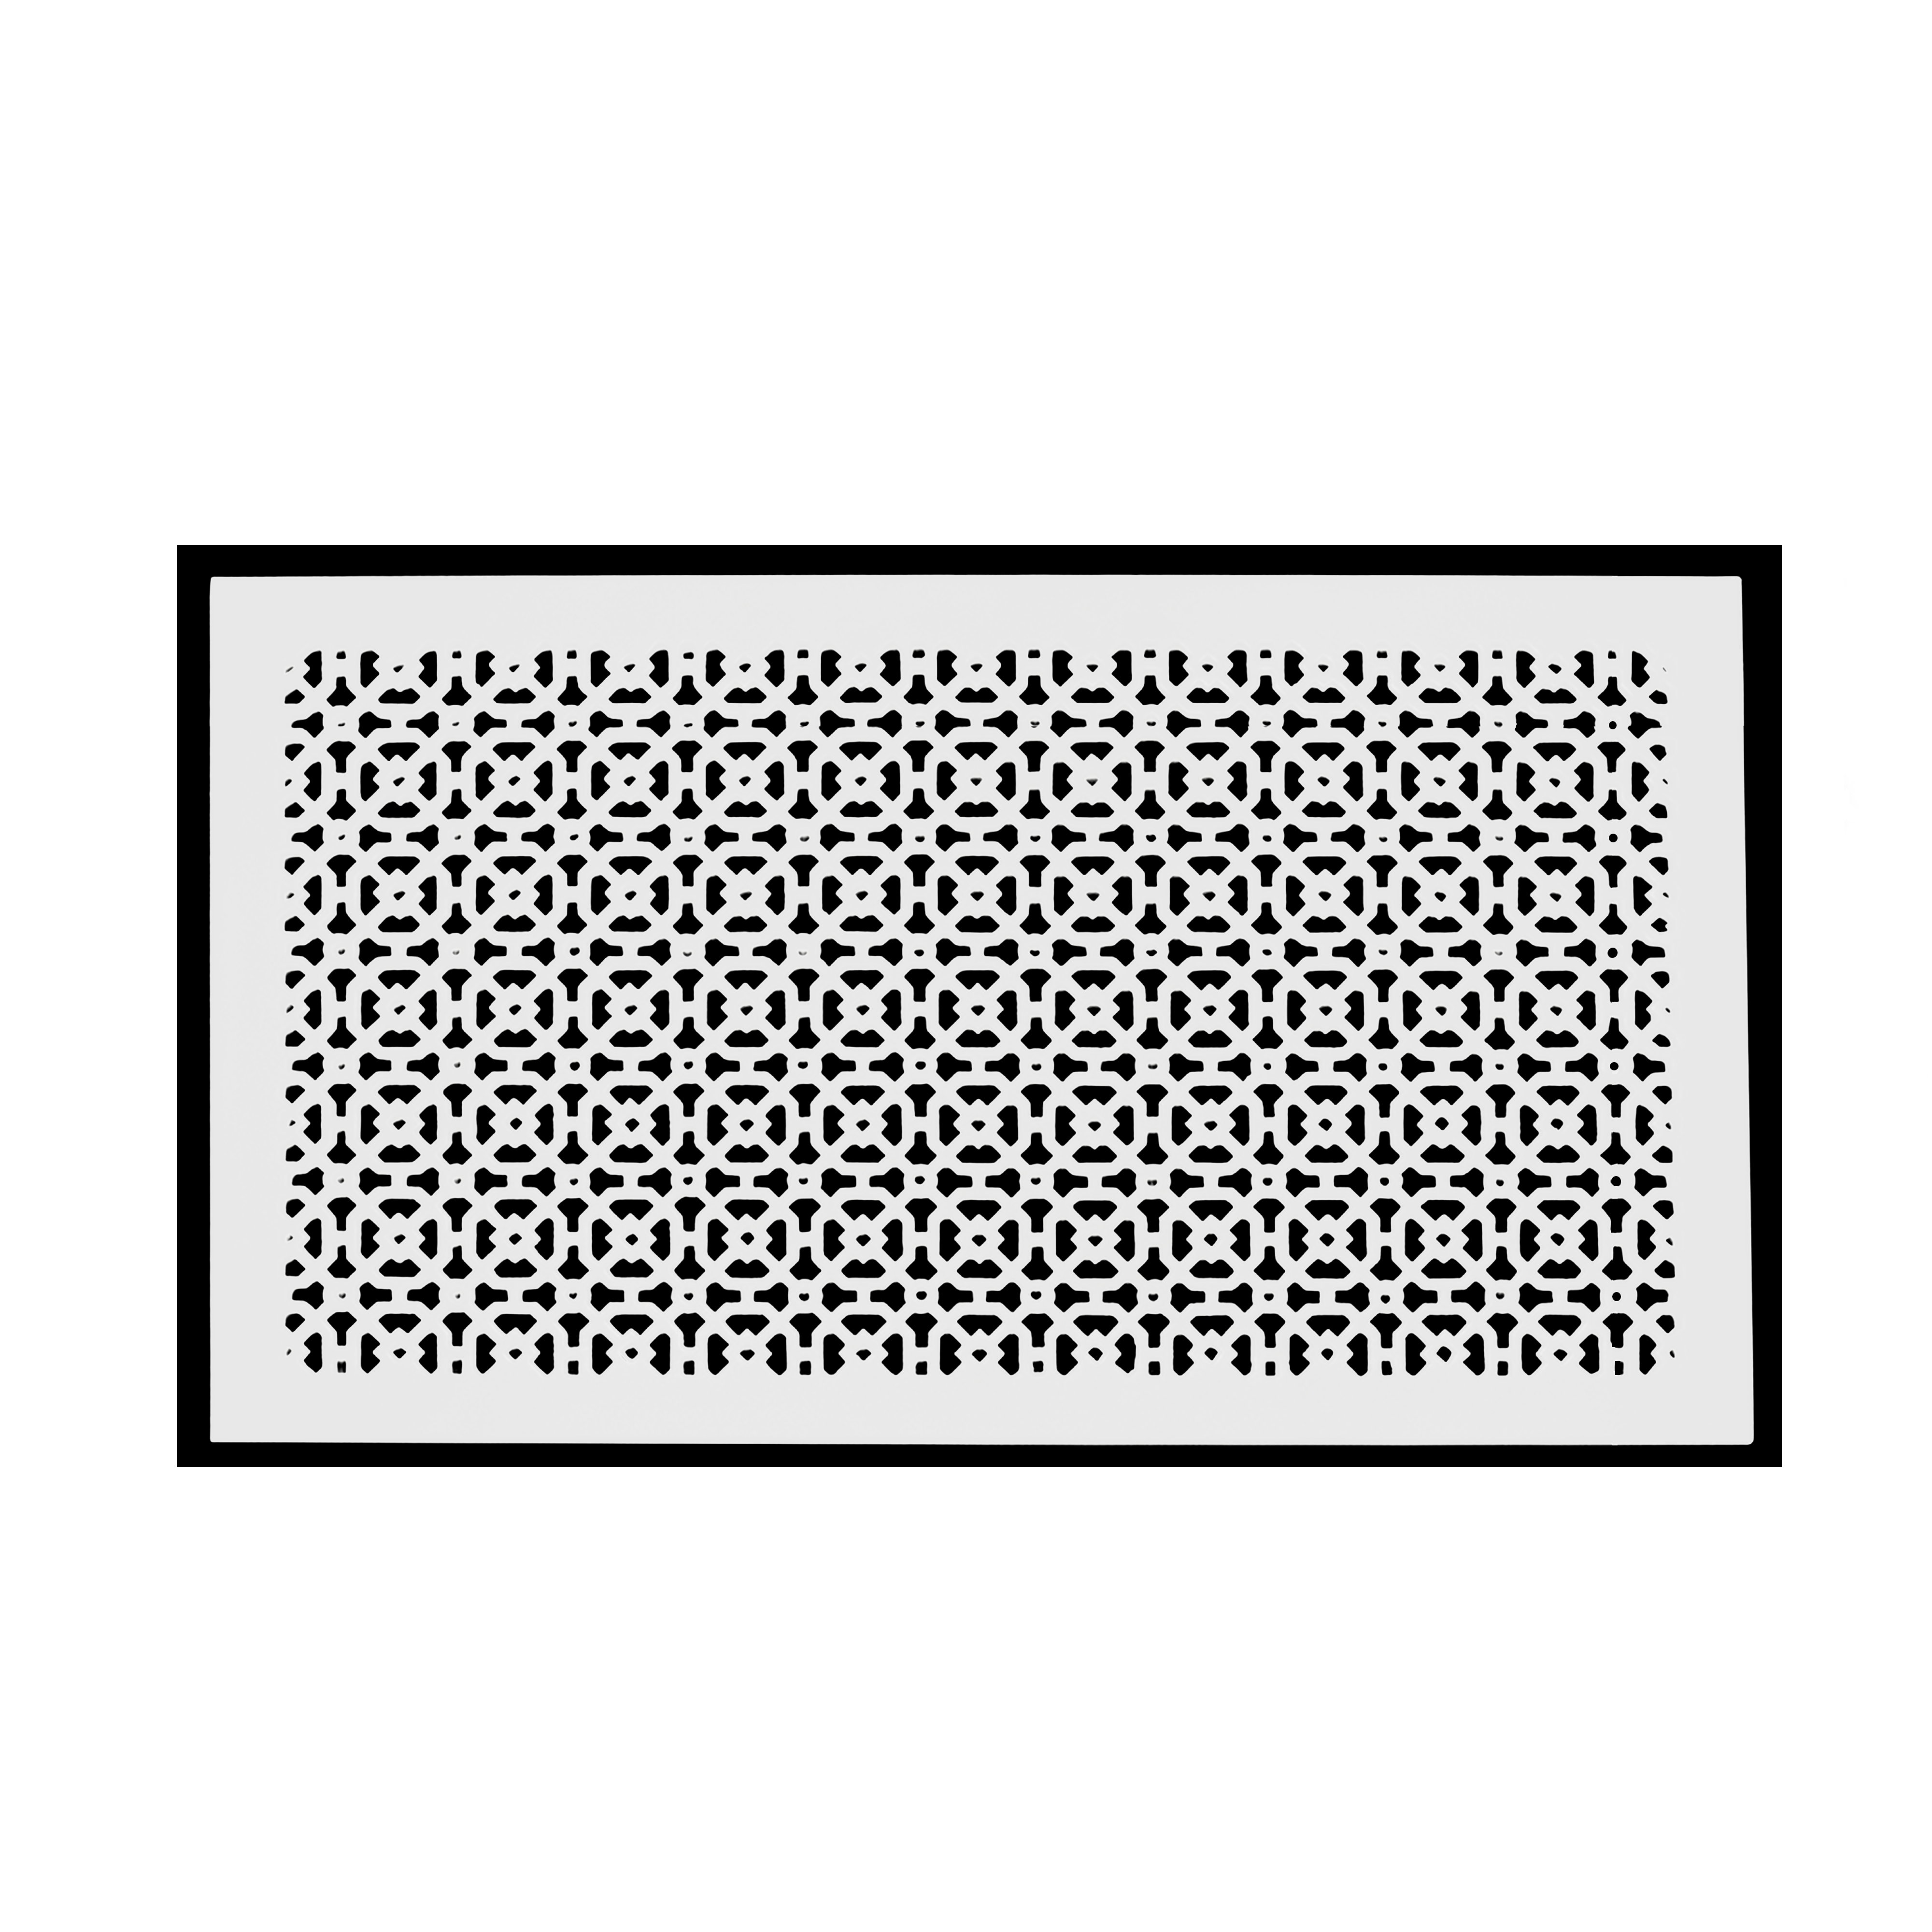 Achtek AIR RETURN 14"x26" Duct Opening (Overall Size 16"x28") | Heavy Cast Aluminum Air Grille HVAC Duct || Powder Coated